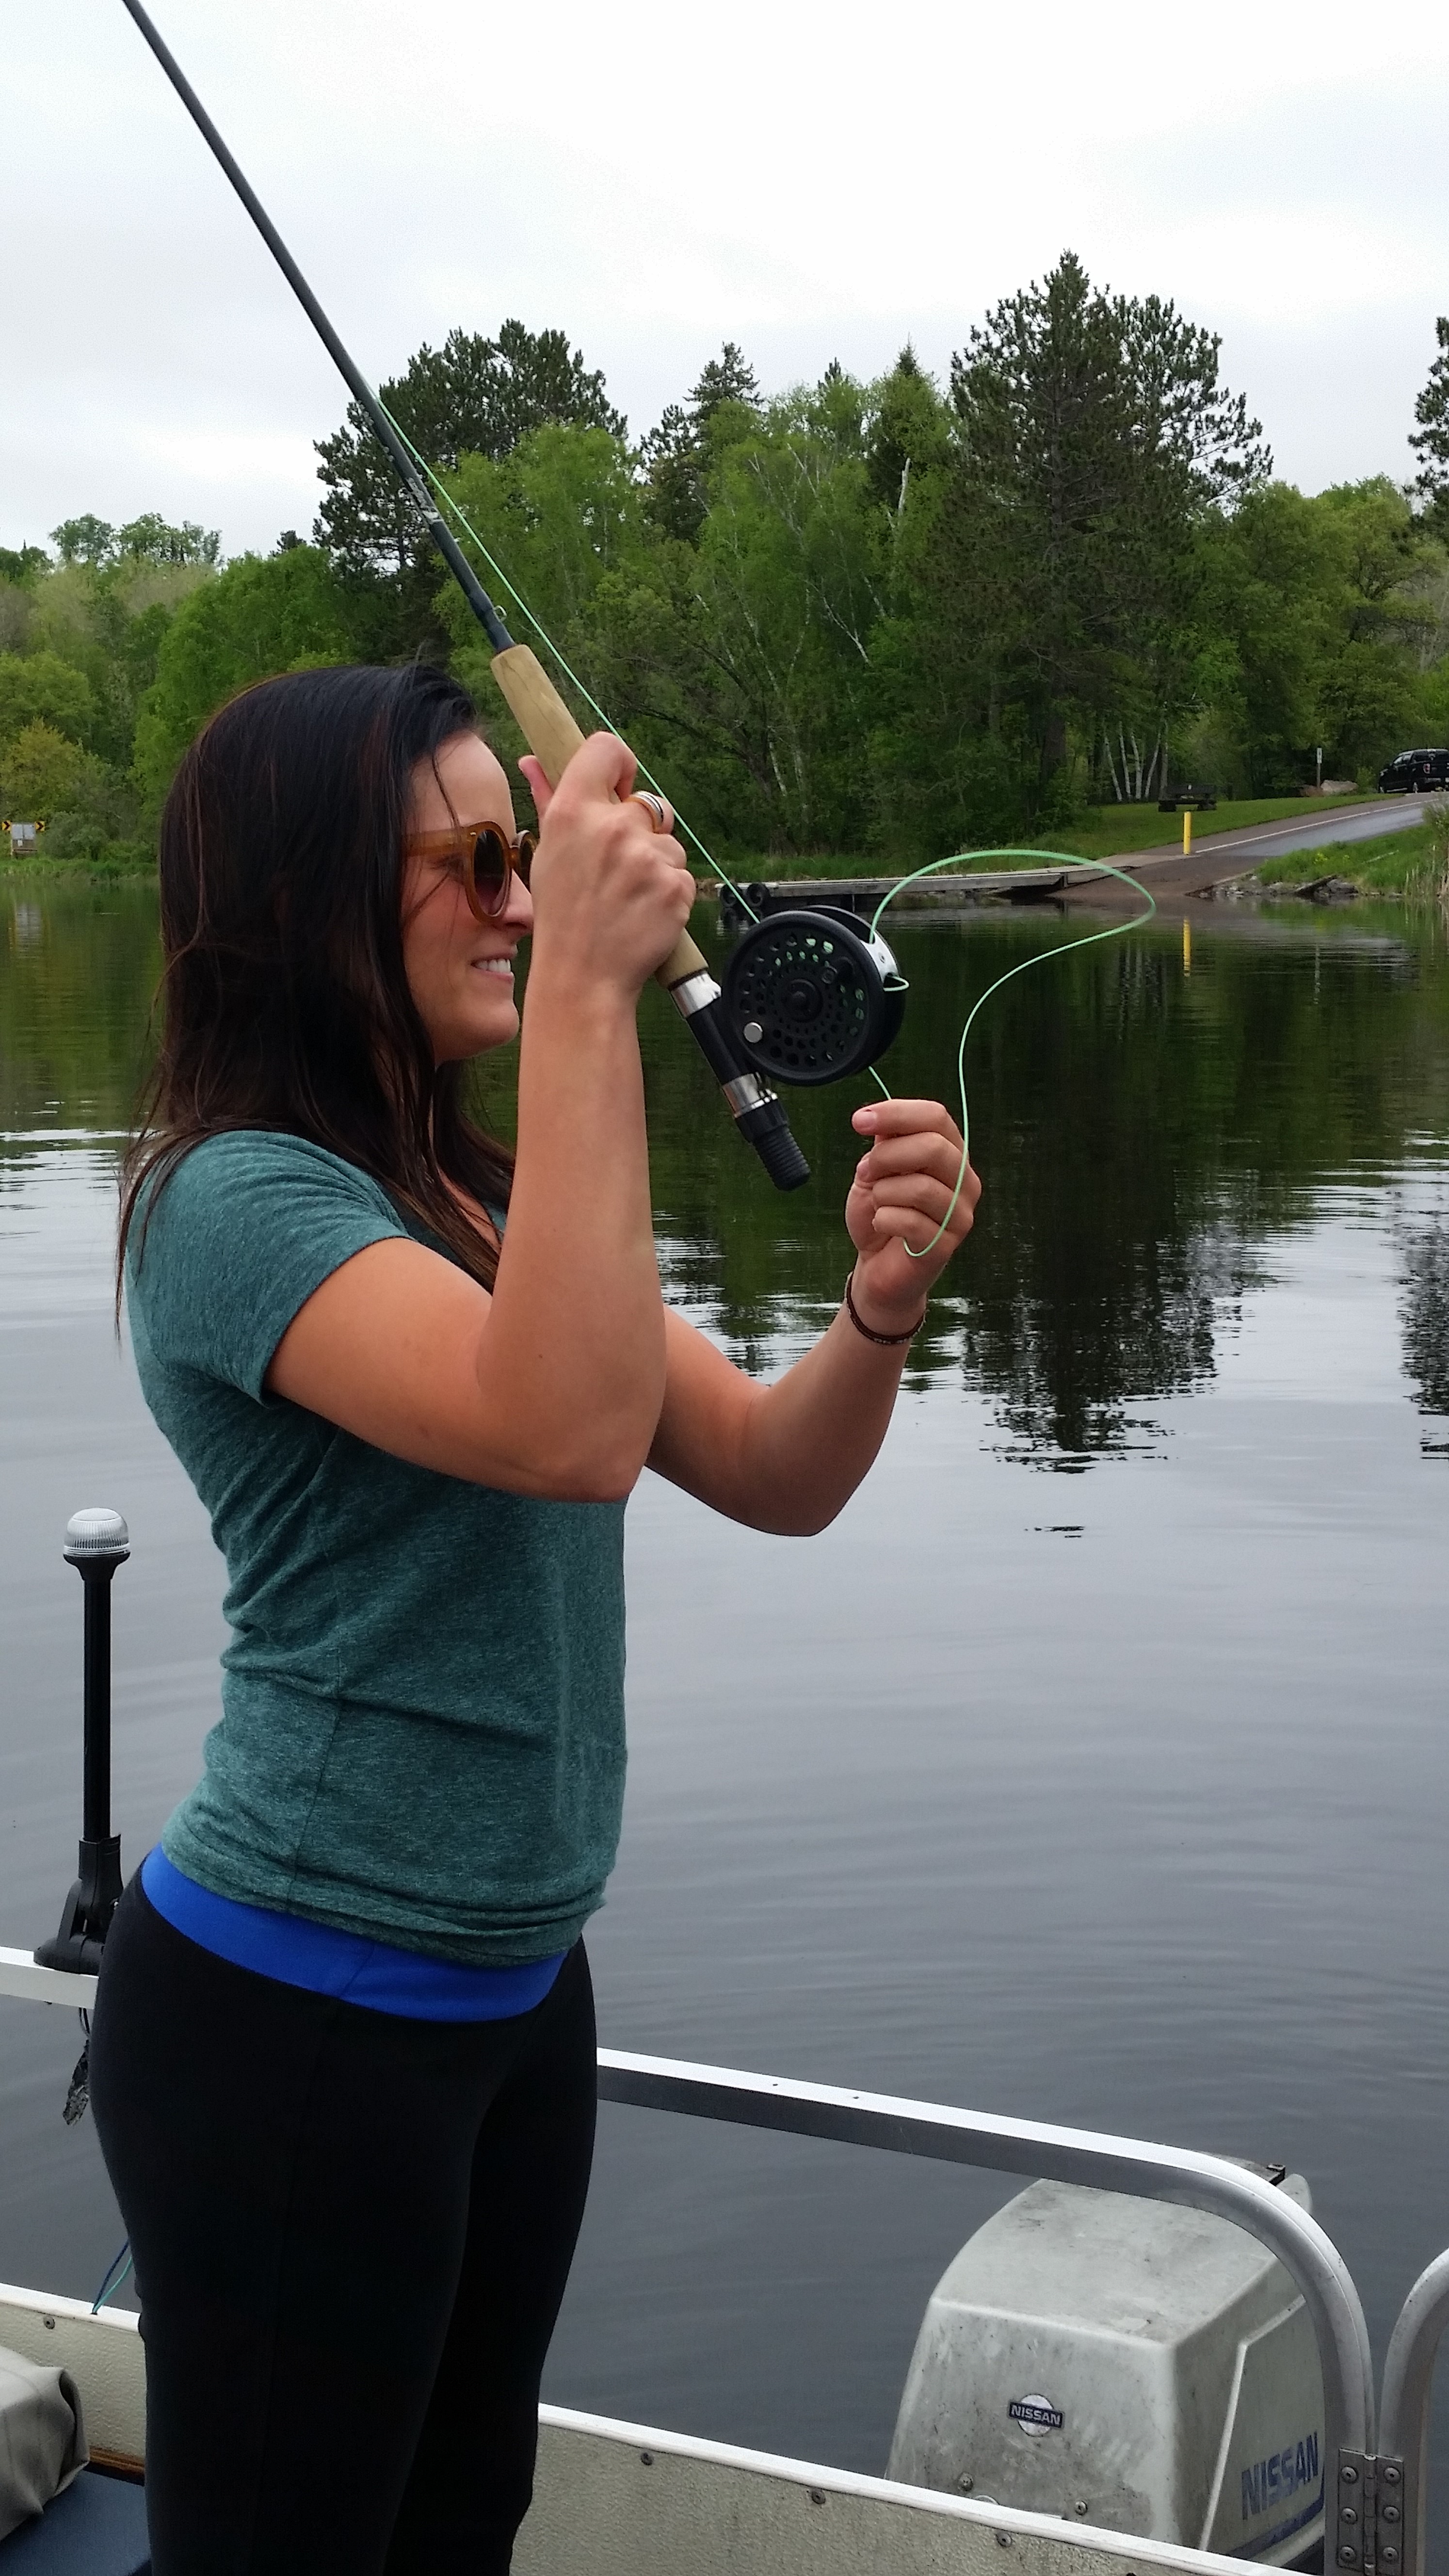 Chicks With A Pole- Women Fly Fishing For Bluegills - Mid West Outdoors